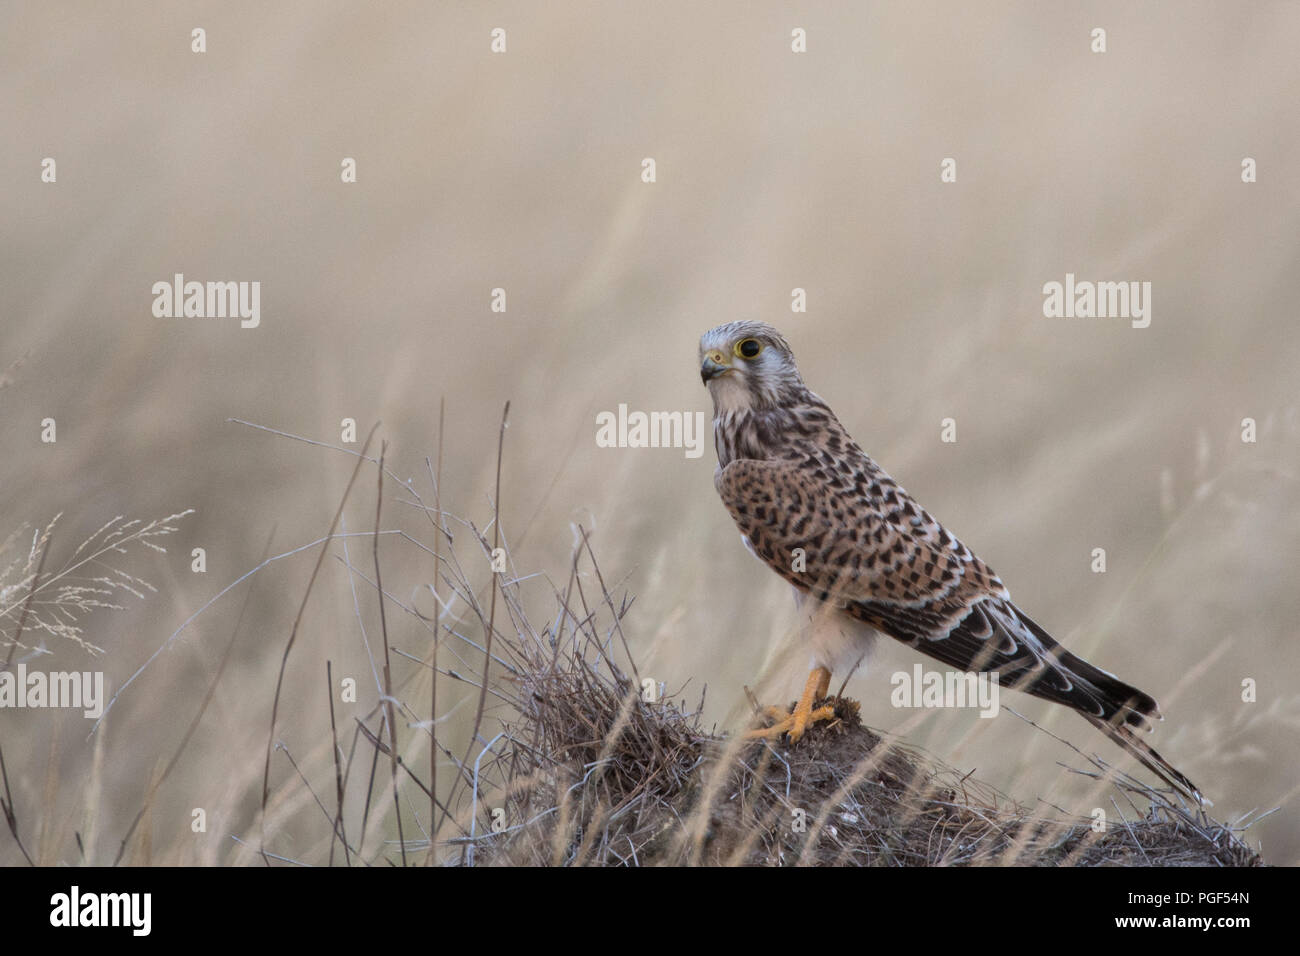 A Common Kestrel (Falco tinnunculus) perched on grass at Tal Chapar Wildlife Sanctuary, Rajasthan, India where it is a winter migrant Stock Photo